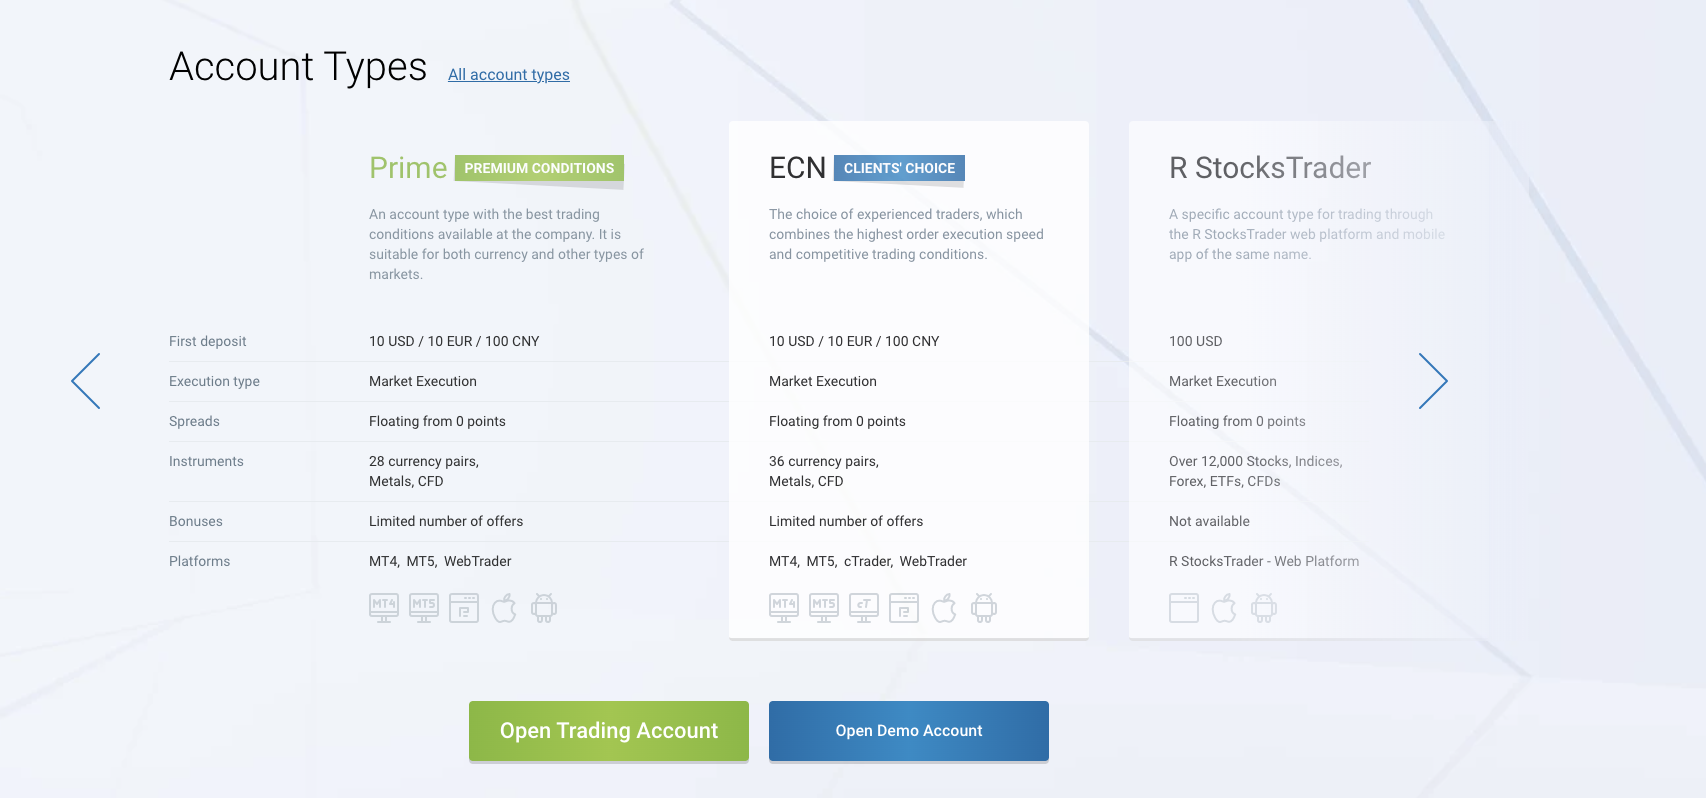 RoboForex account types, including the Prime account and the ECN account